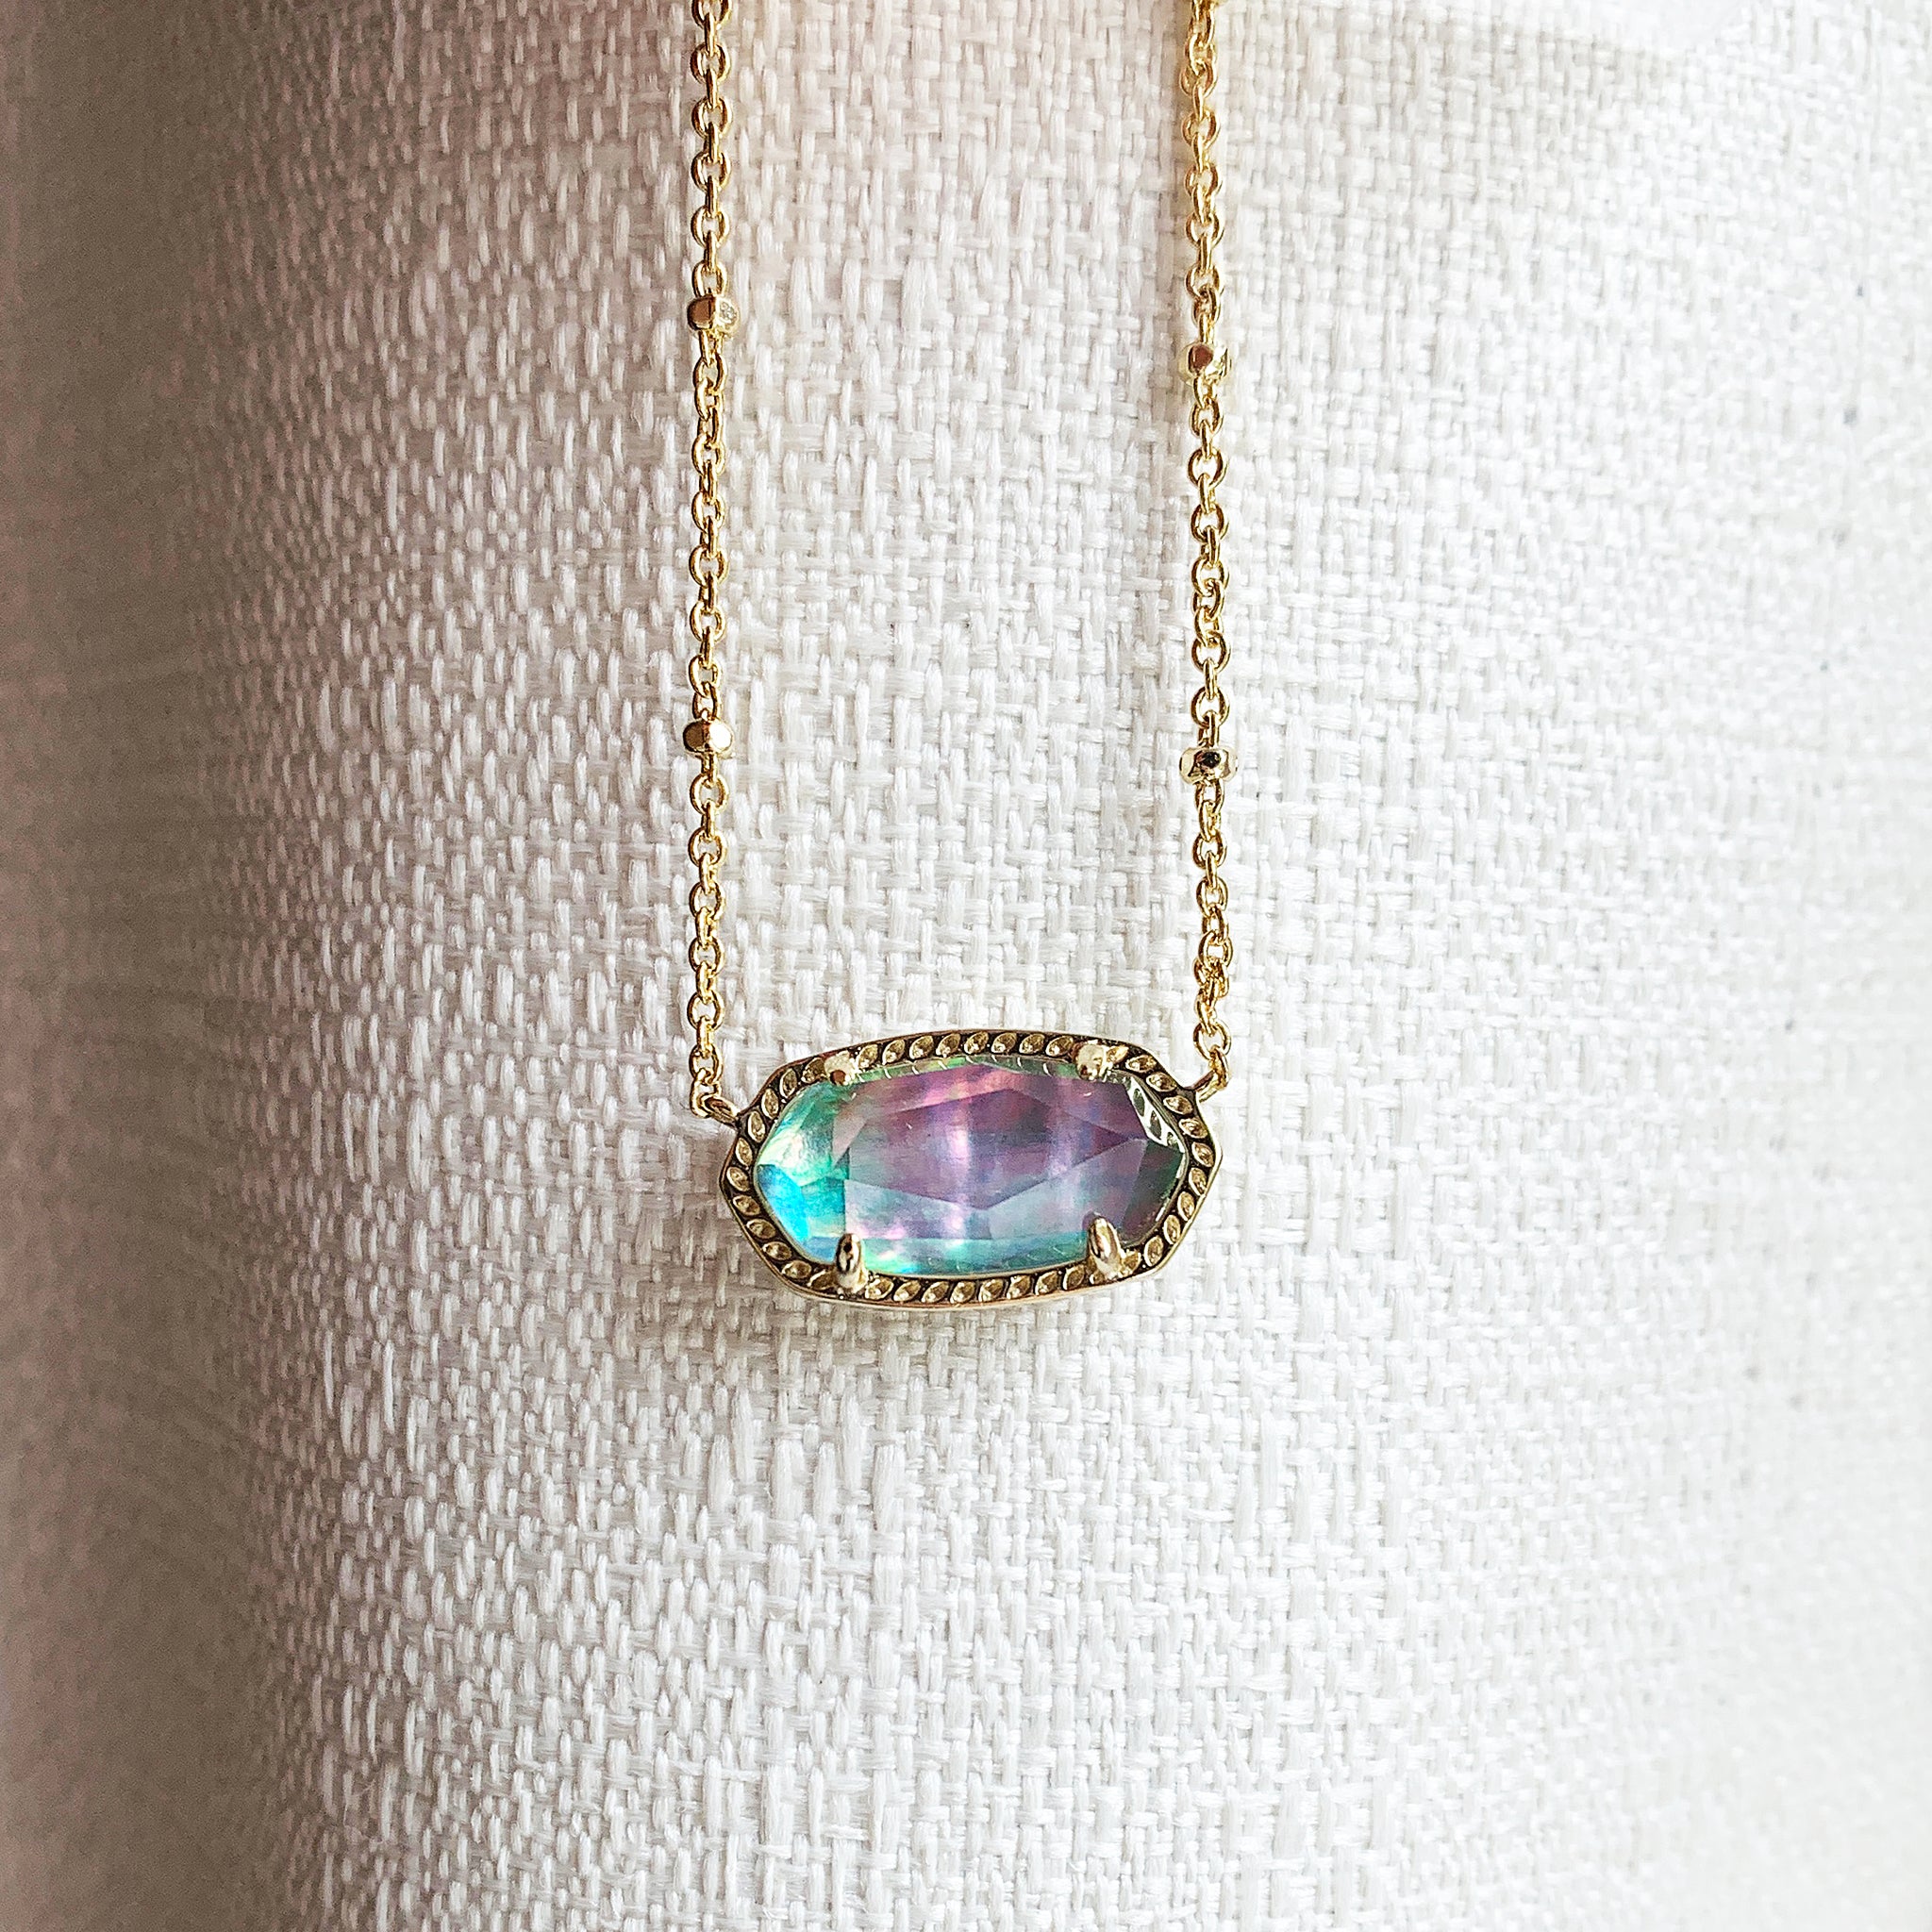 Kendra Scott Elisa Multi Strand Pearl Pendant Necklace in Lilac Abalone and Gold